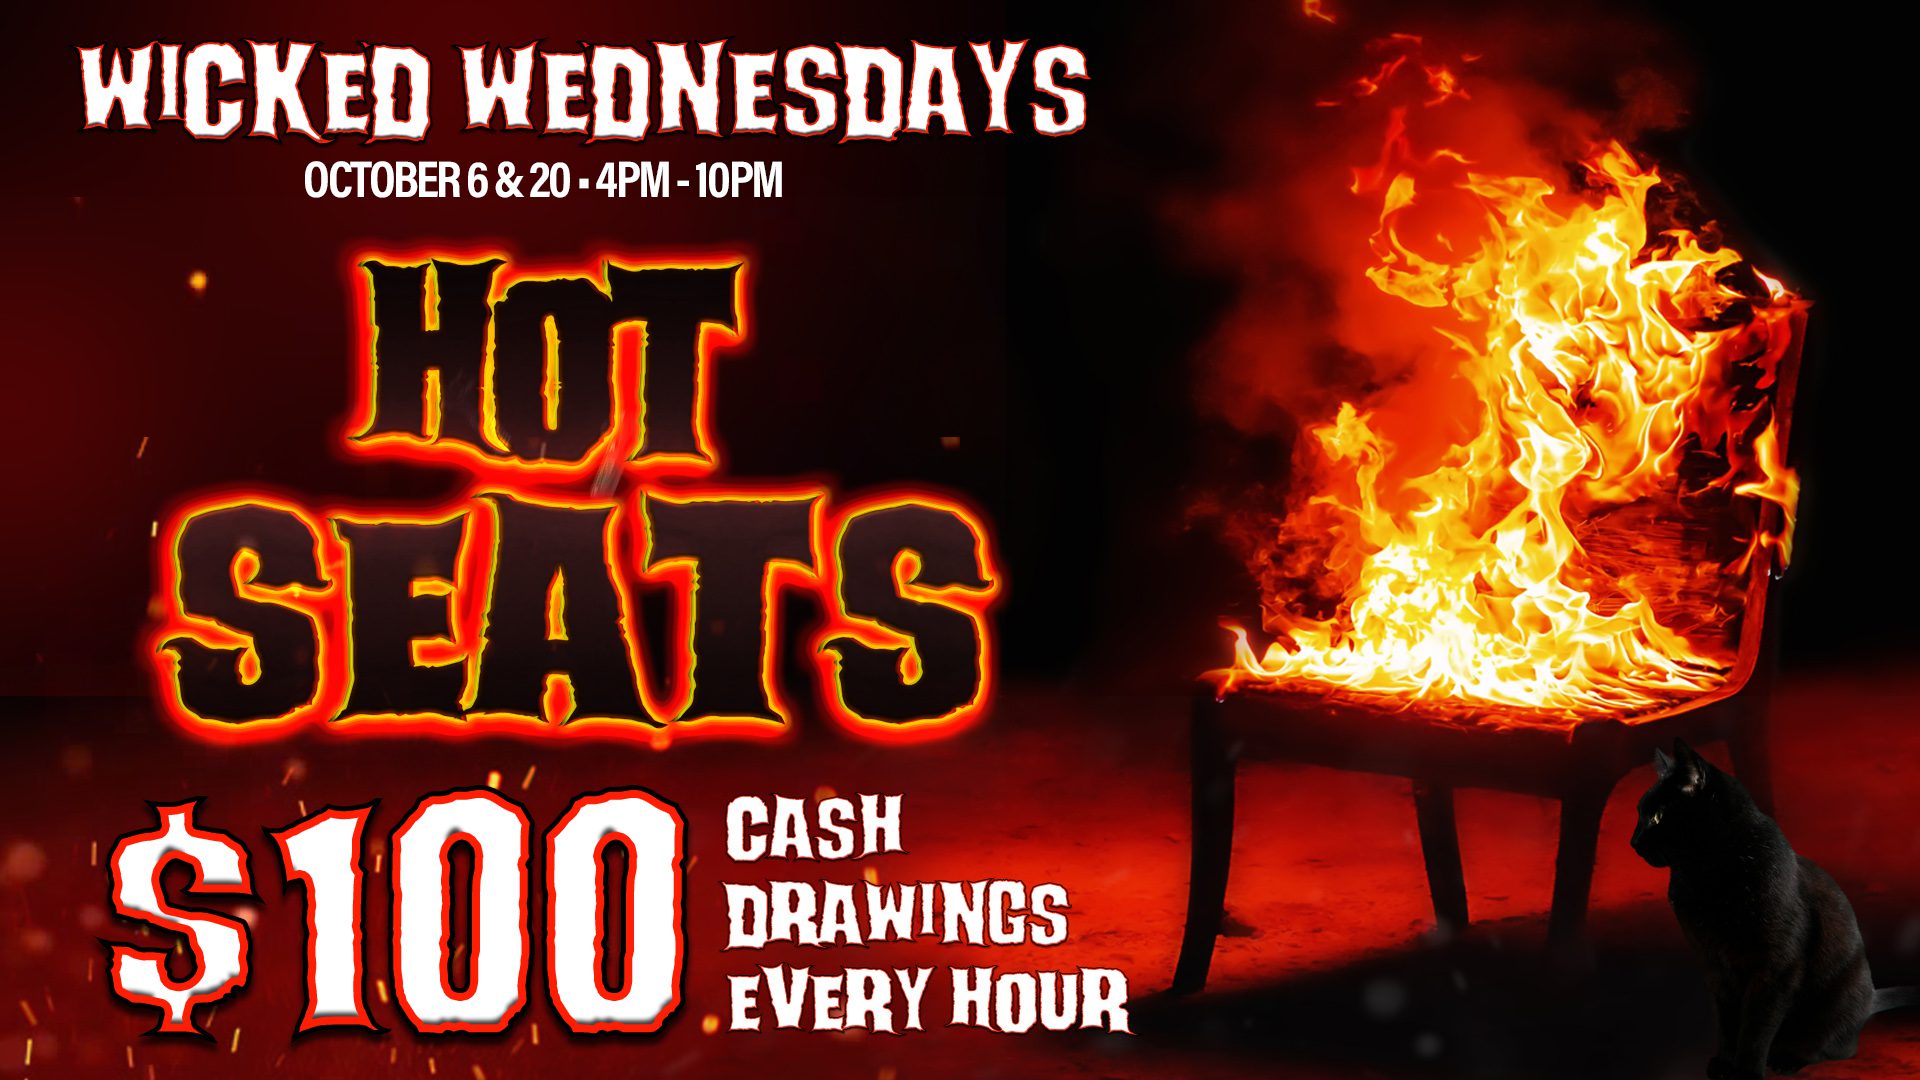 Promotional flyer for wicked wednesdays hot seats event with fire-themed graphics, announcing $100 cash drawings every hour from 4 pm to 10 pm.